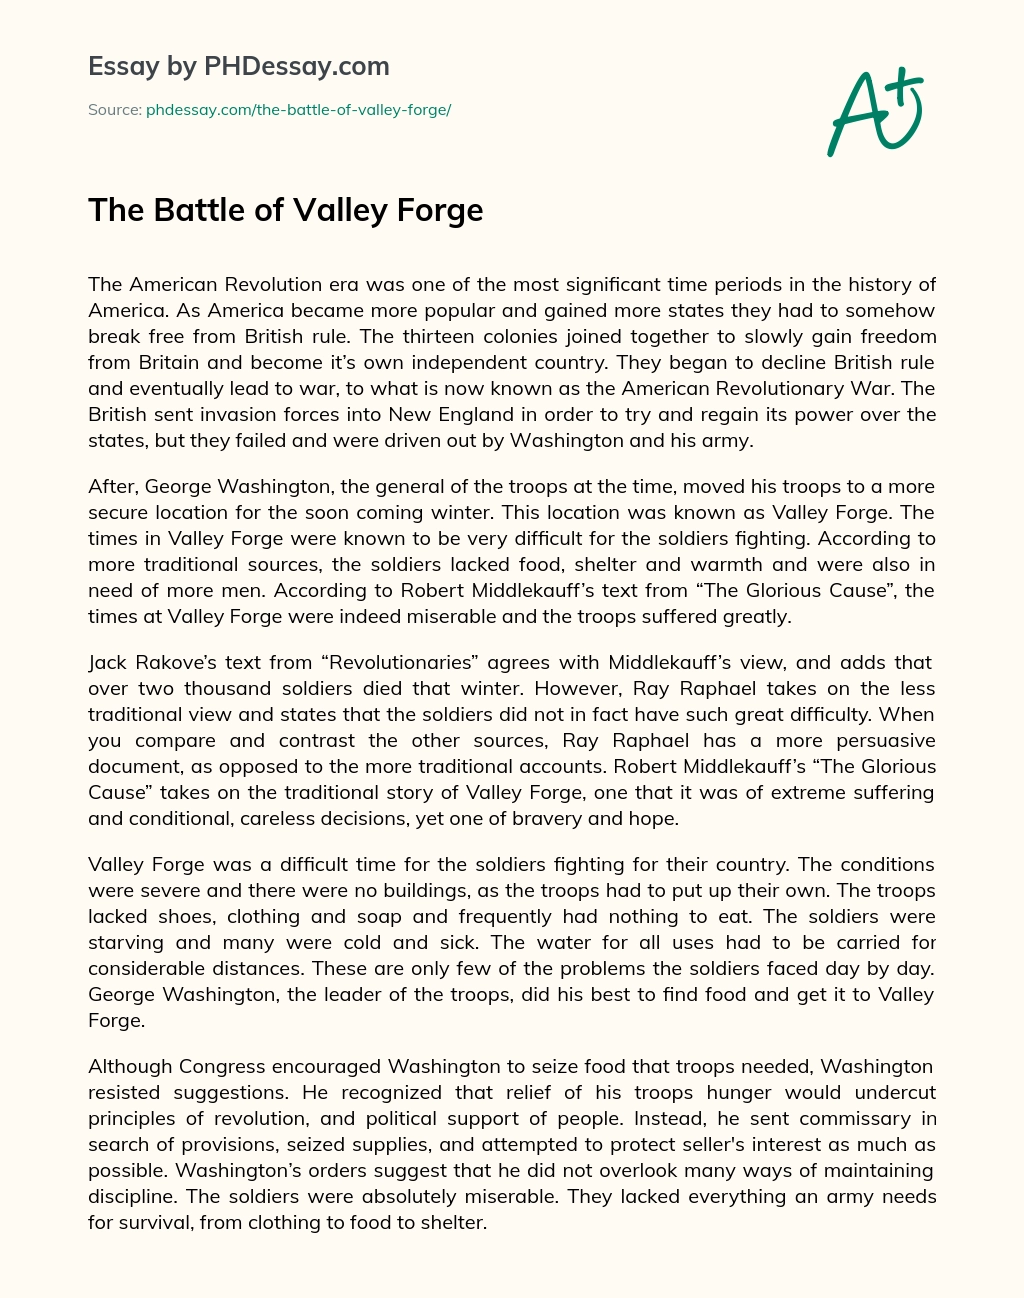 The Battle of Valley Forge essay